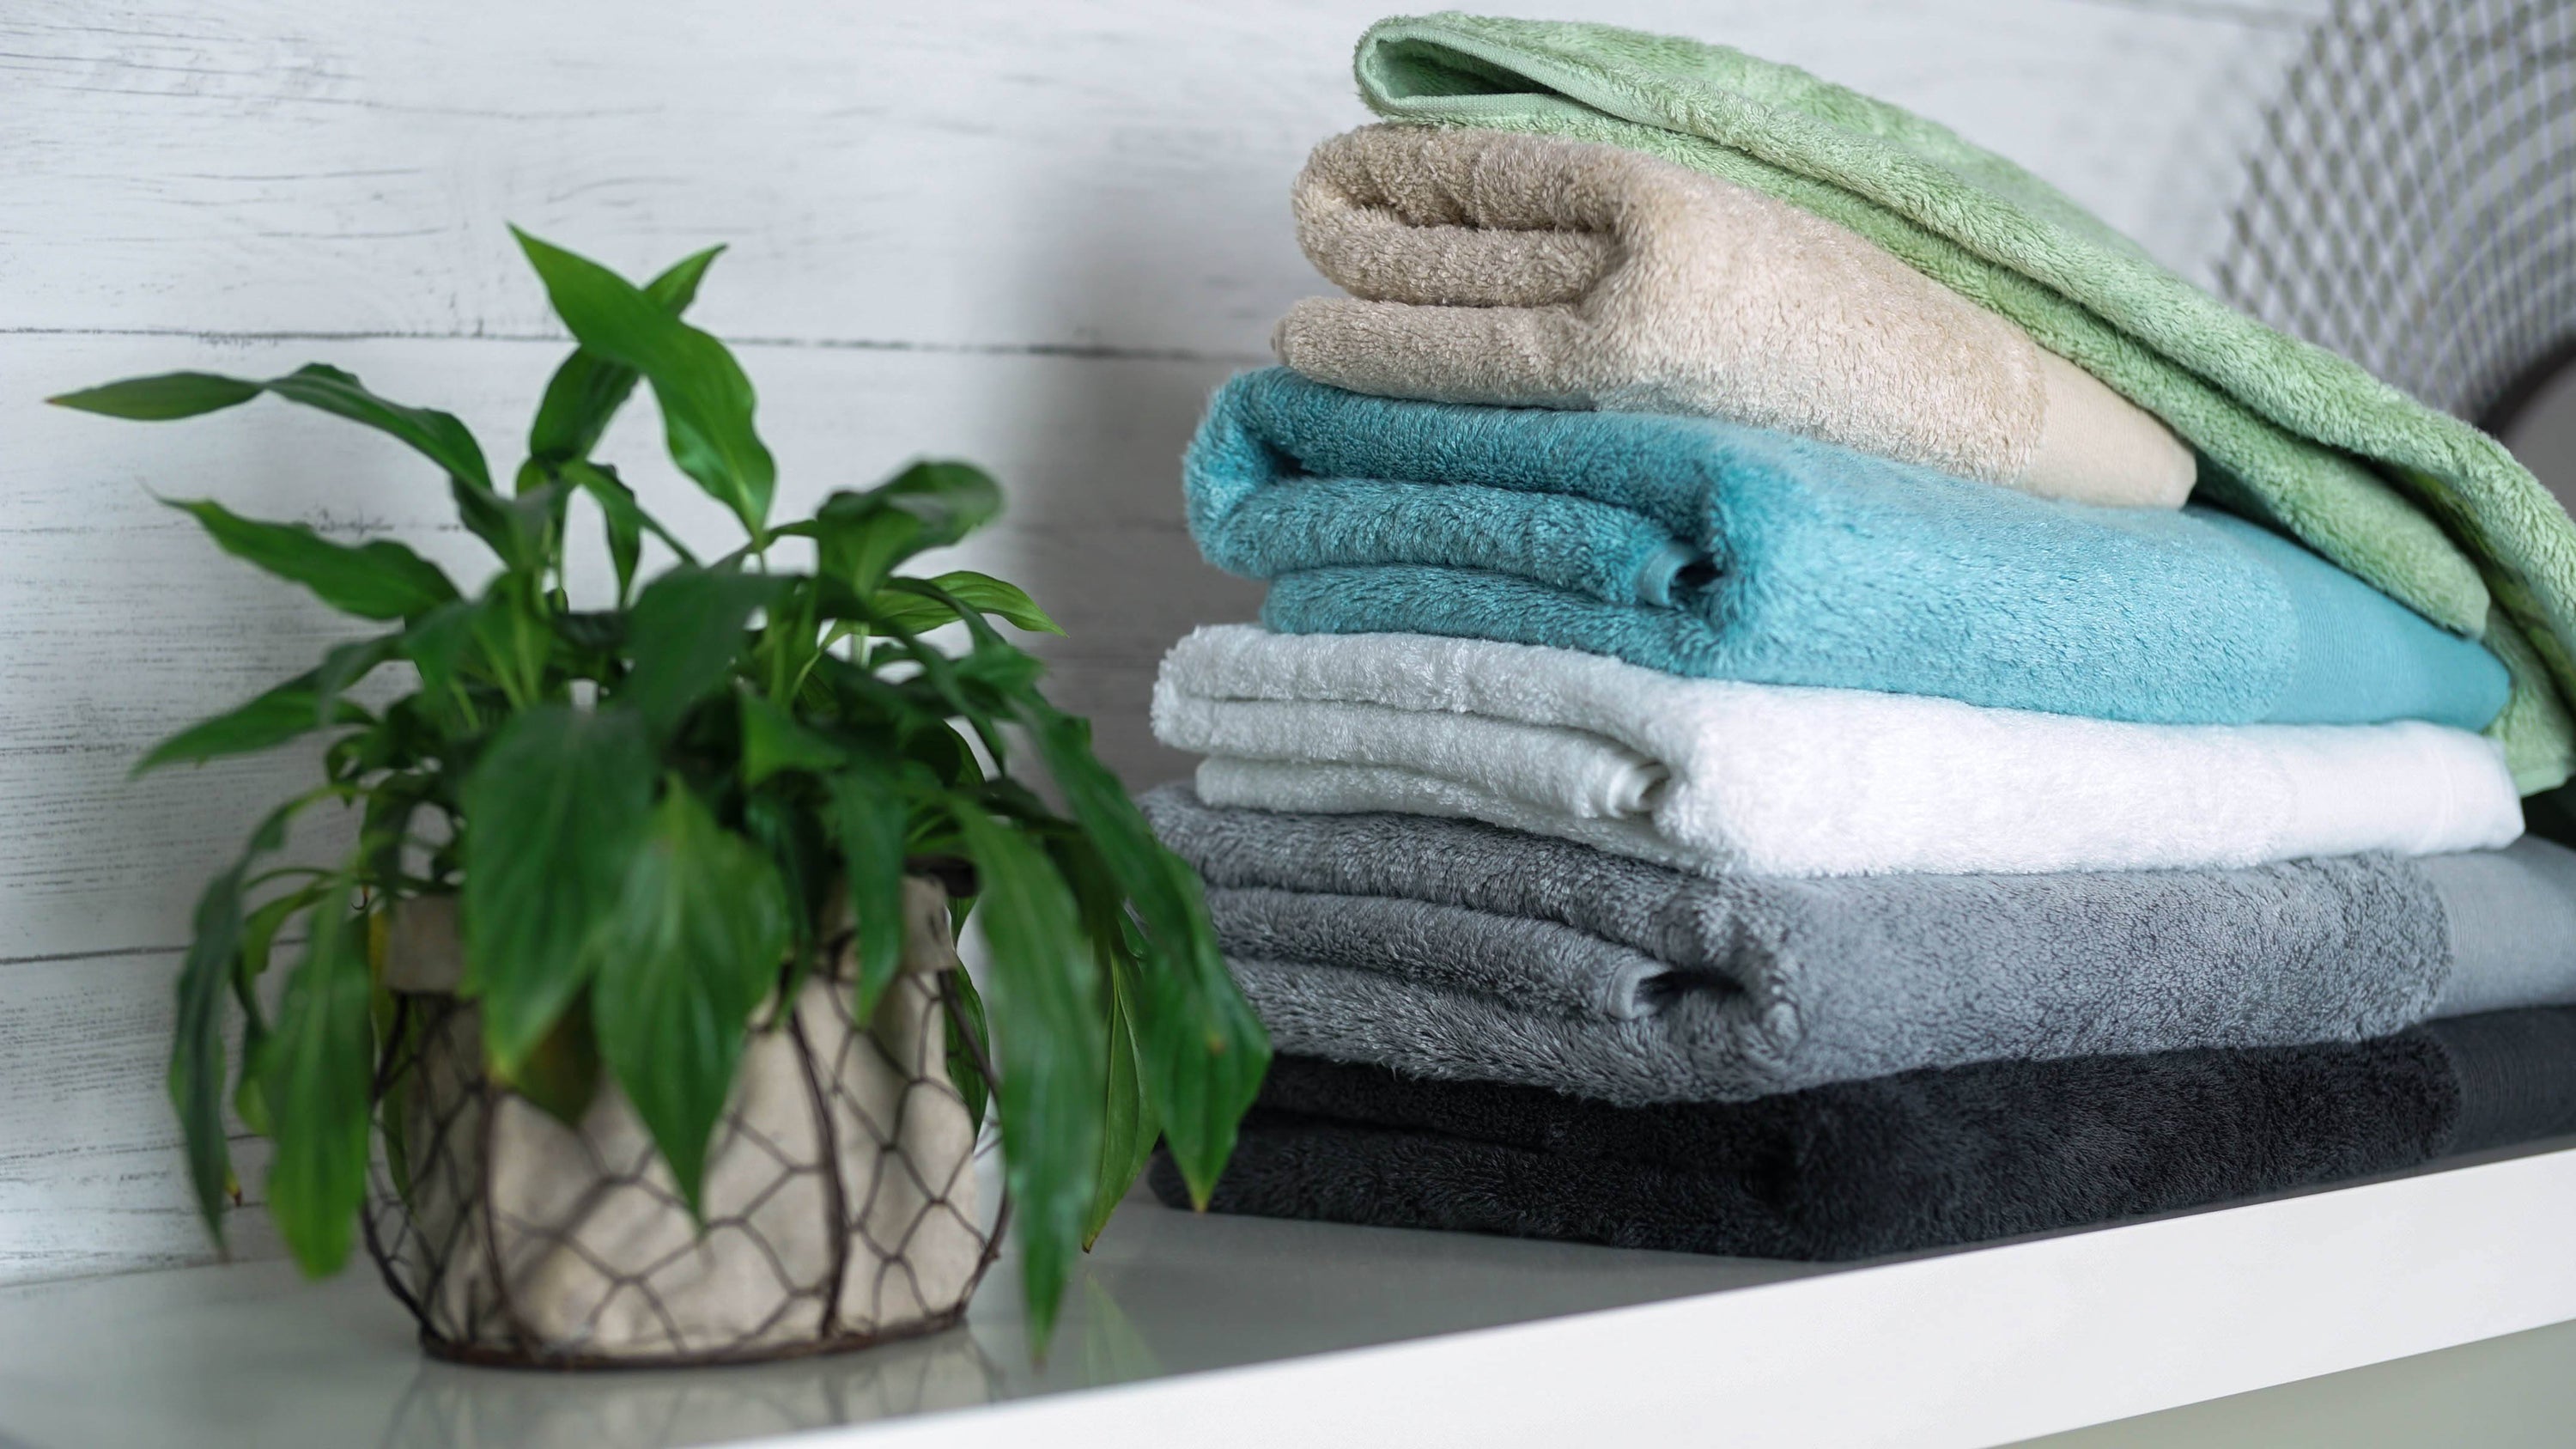 bamboo towels have many benefits